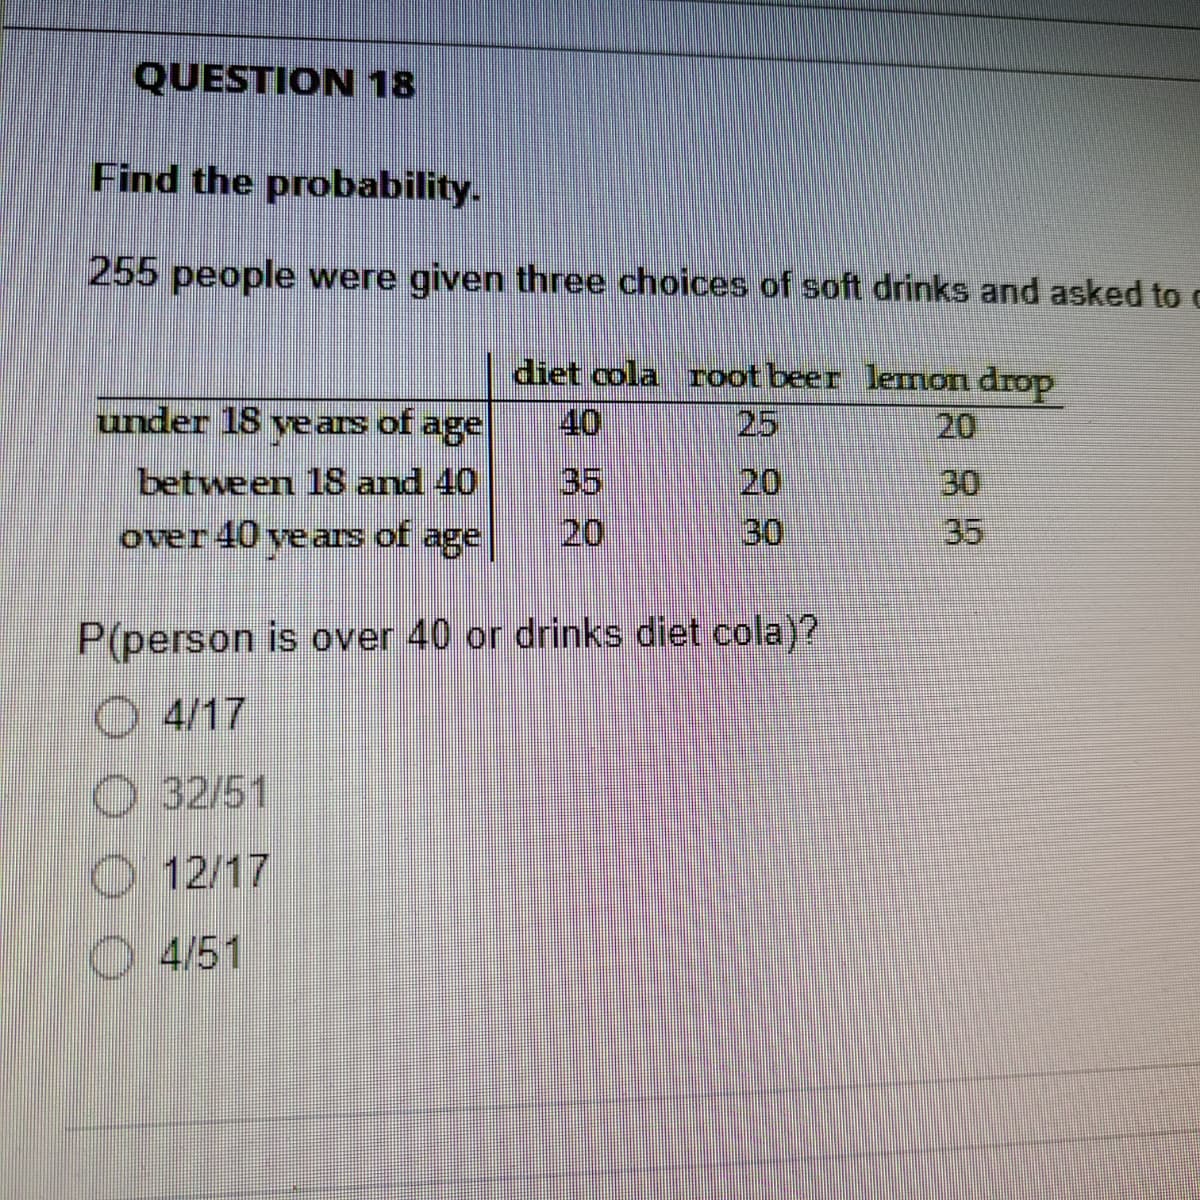 QUESTION 18
Find the probability.
255 people were given three choices of soft drinks and asked to c
diet cola root beer lemon drop
40
under 18 vears of
25
20
age
between 18 and 40
35
20
30
30
35
over 40 vears of age
20
P(person is over 40 or drinks diet cola)?
O 4/17
O 32/51
O 12/17
O 4/51
